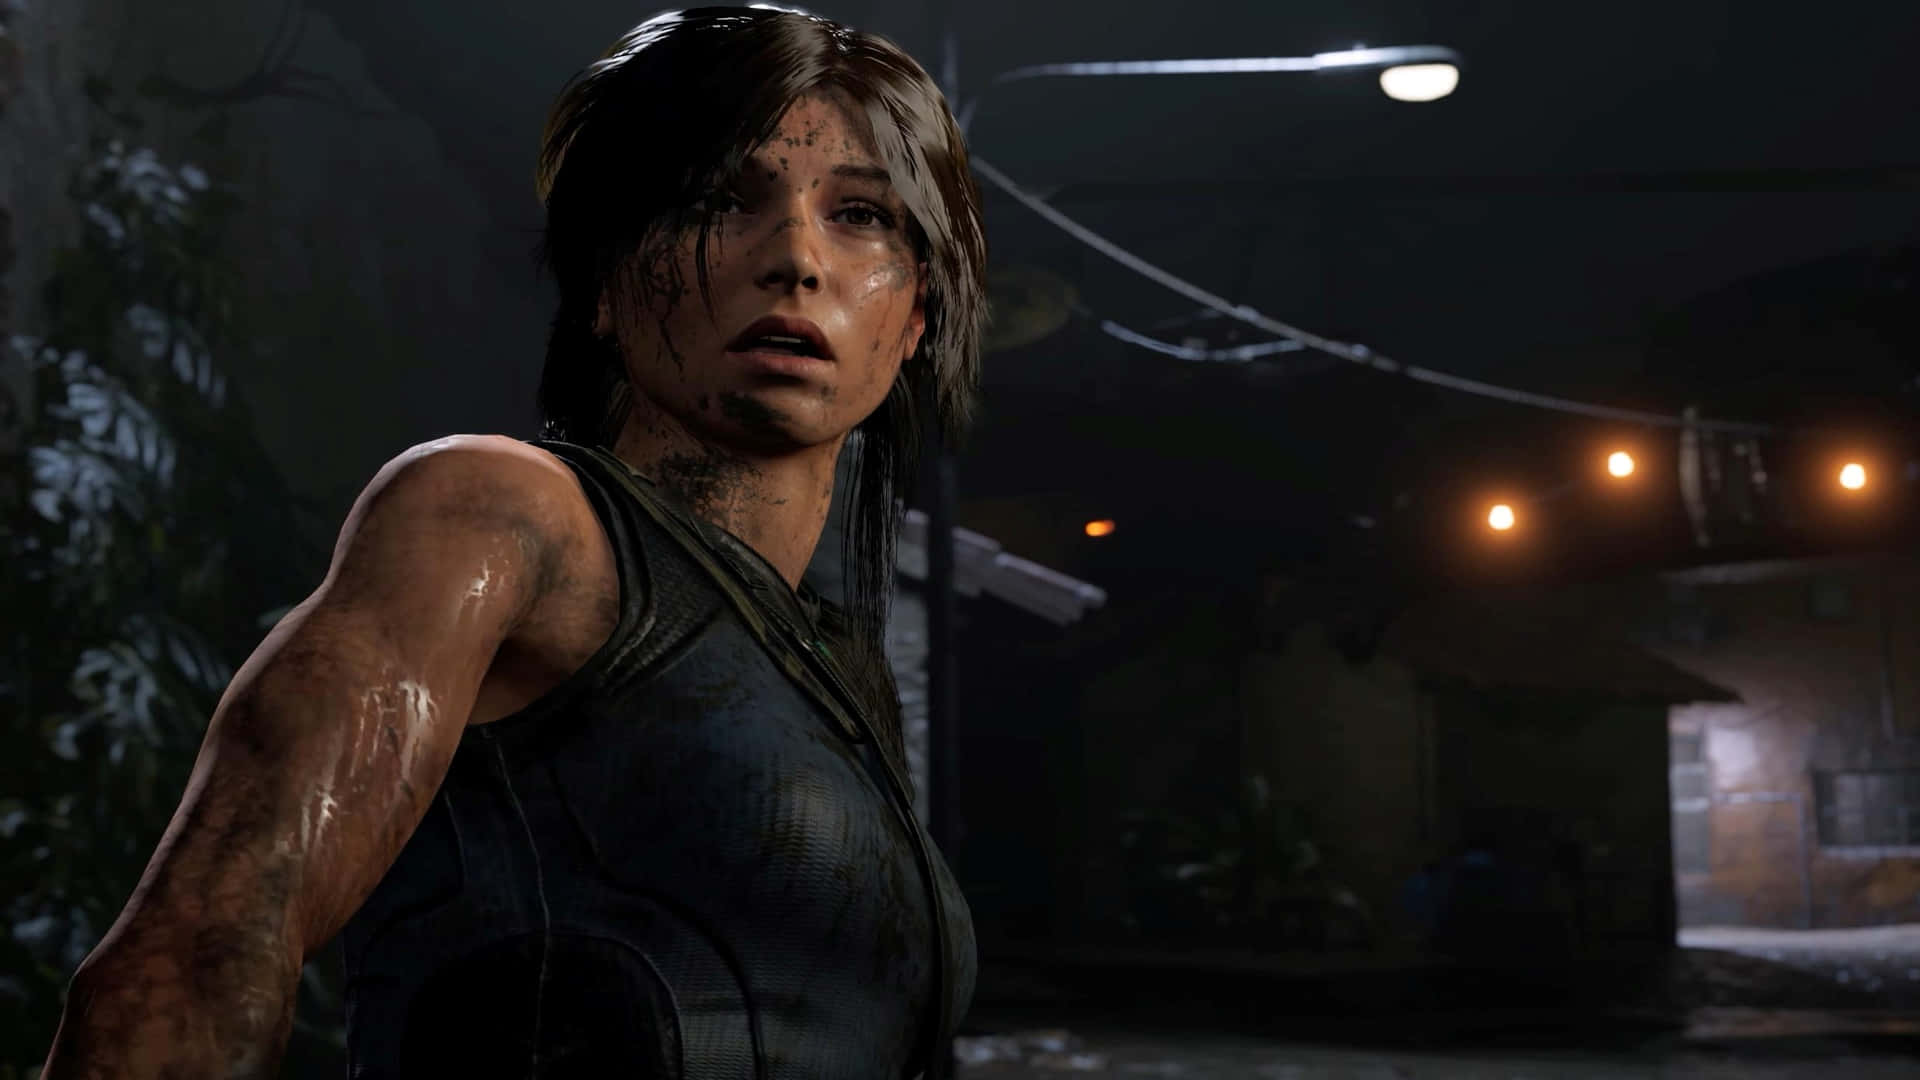 The Tomb Raider Is Standing In The Dark